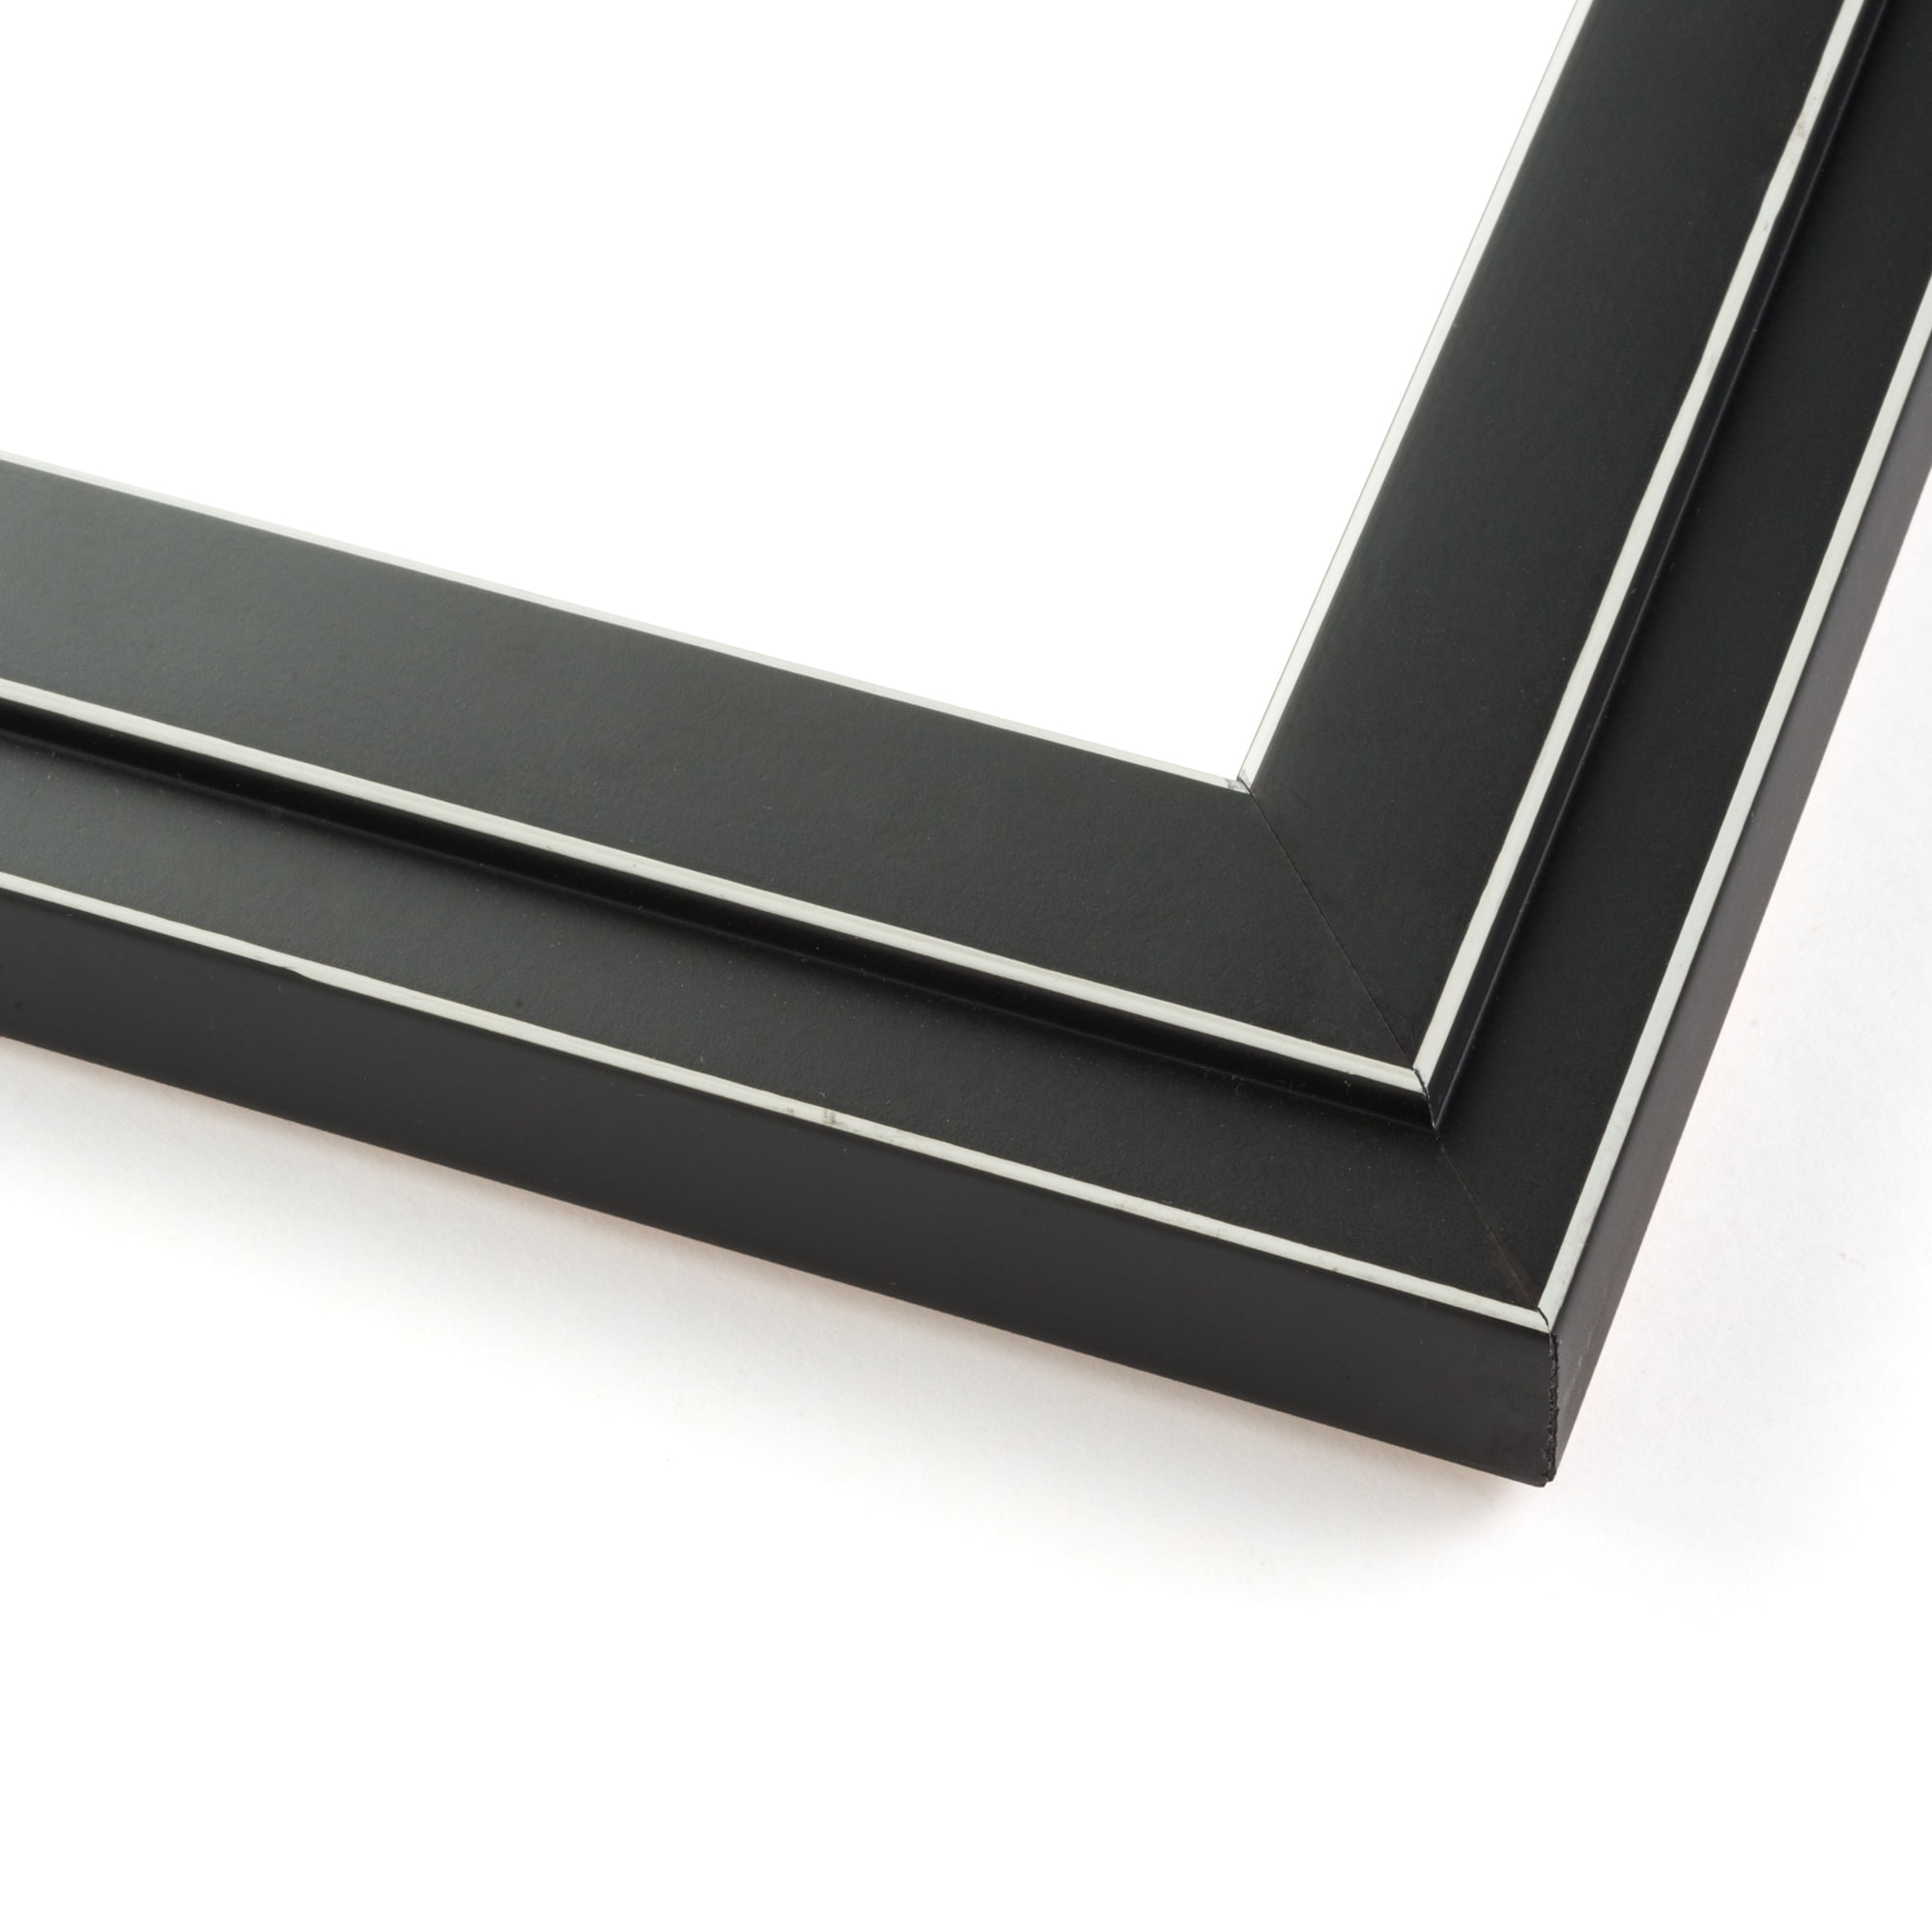 22x32 - 22 x 32 Black and White Pinstripe Solid Wood Frame with UV ...